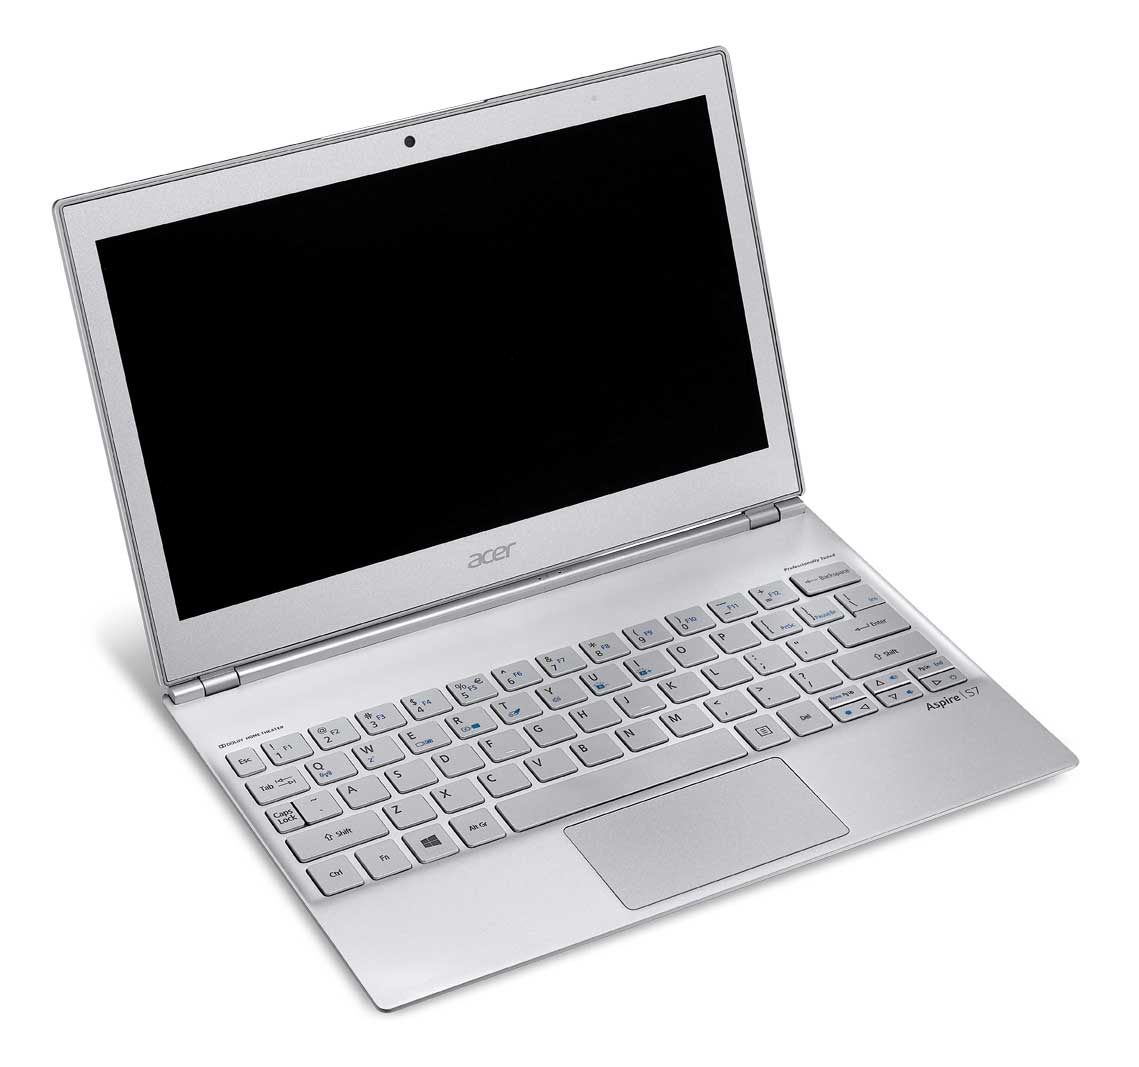 Acer Aspire S7 Ultrabook with Touch